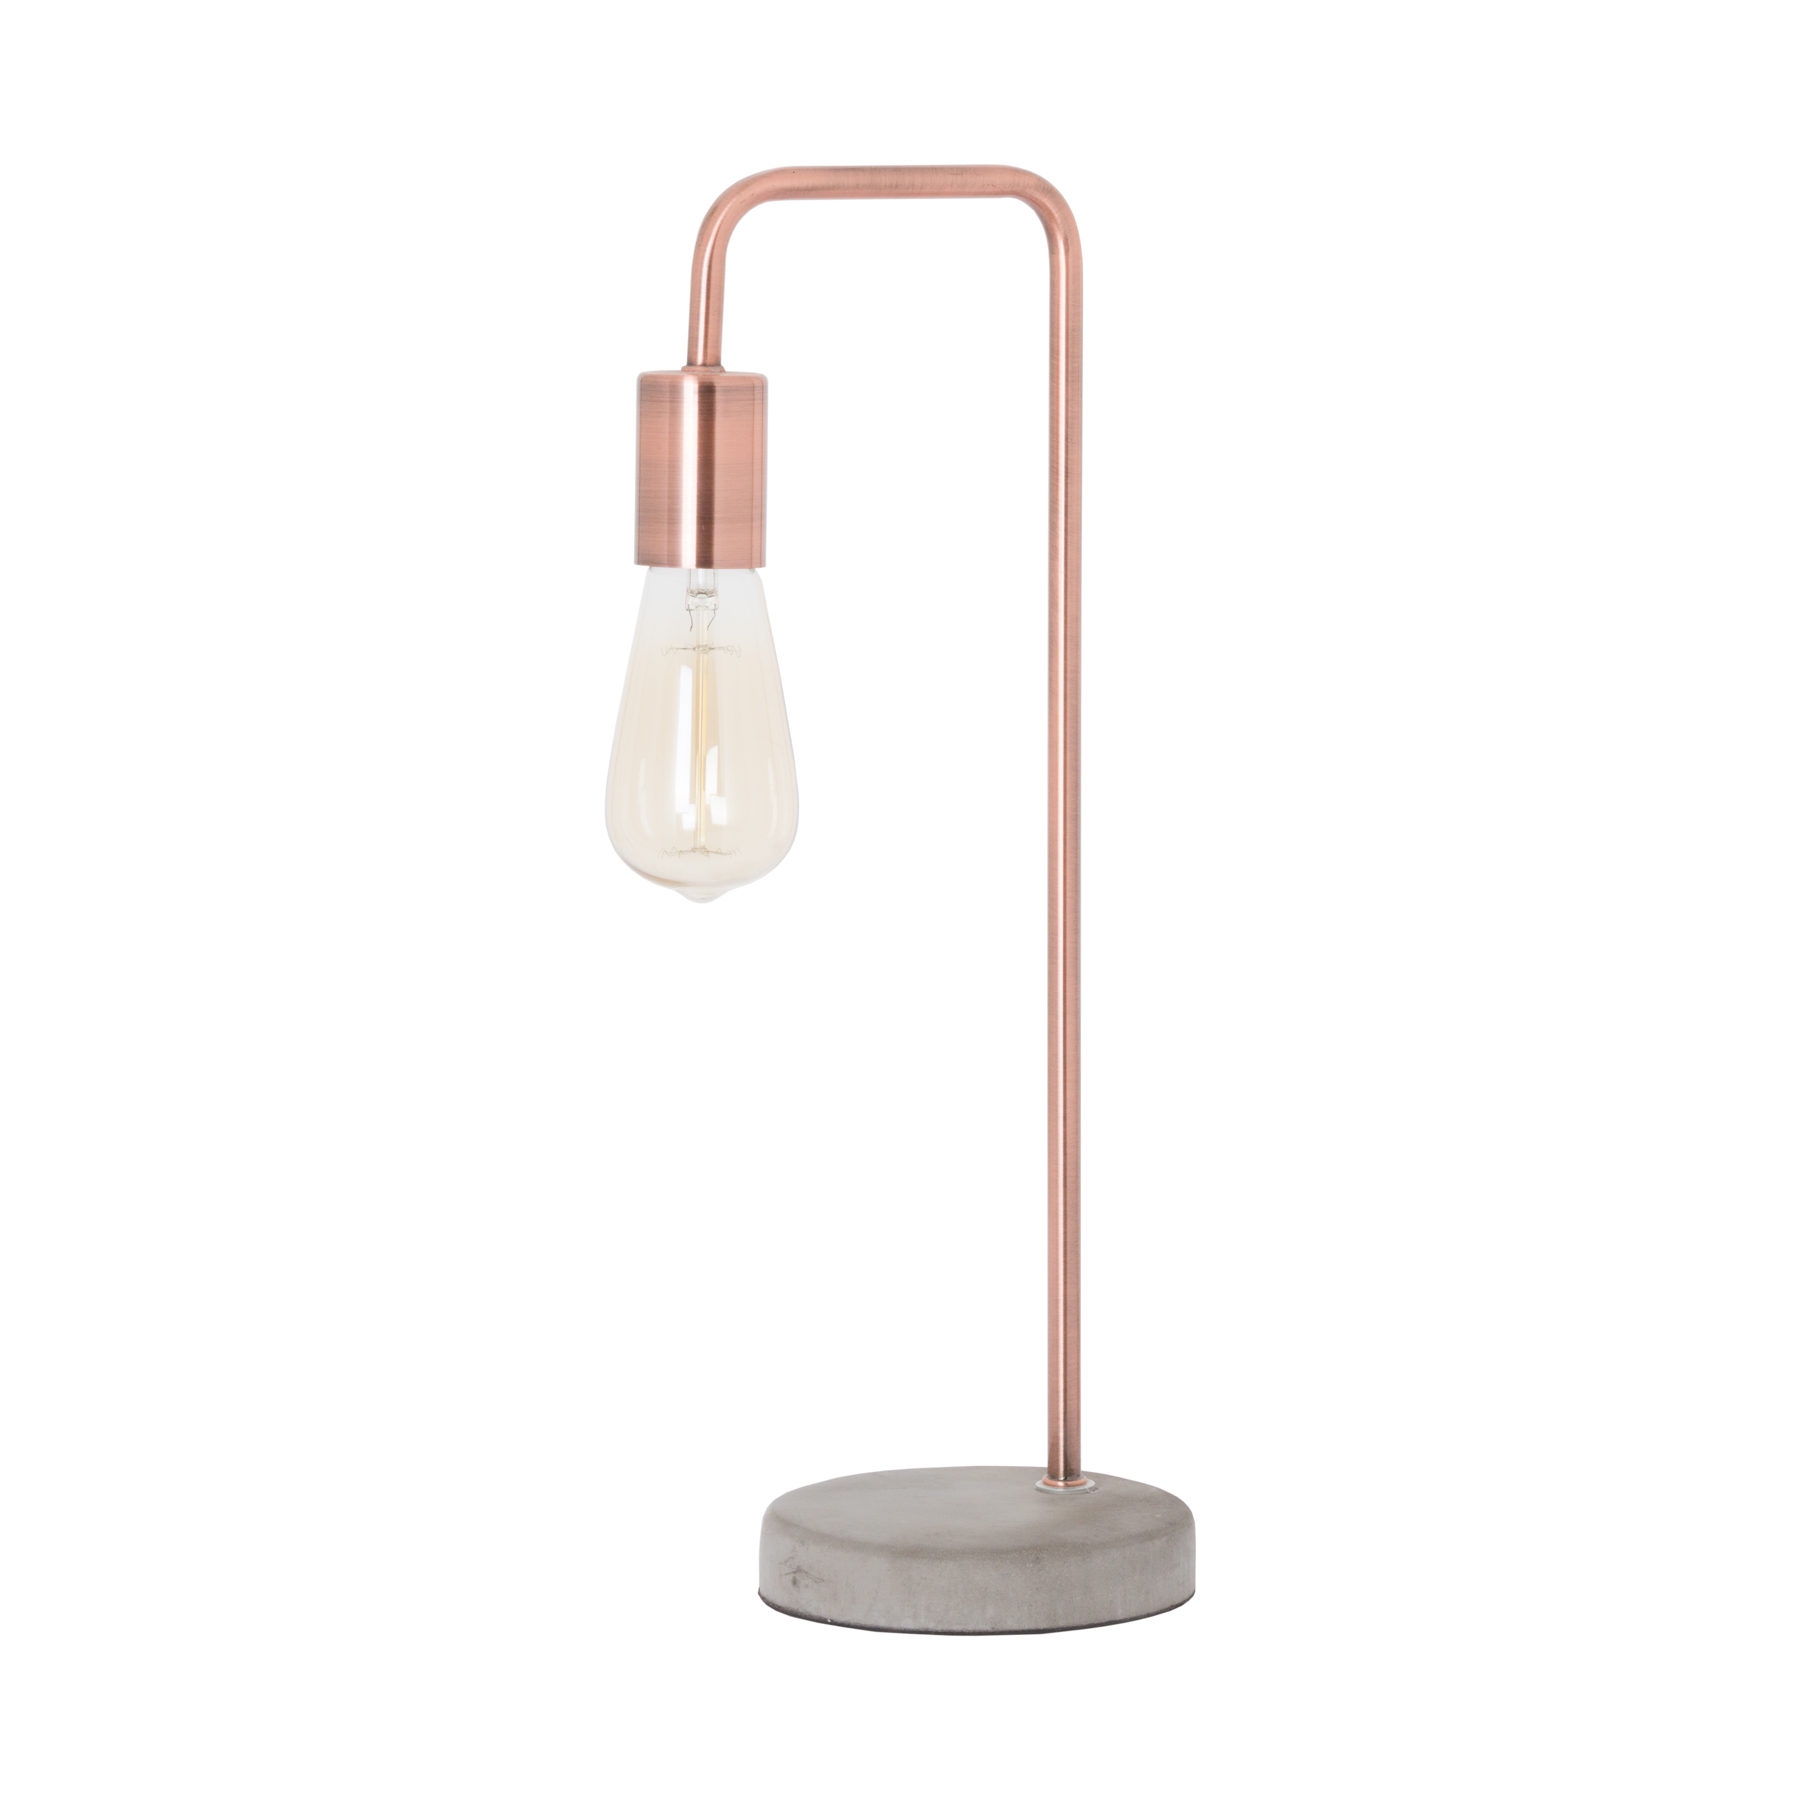 Copper Industrial Lamp With Stone Base - Image 2